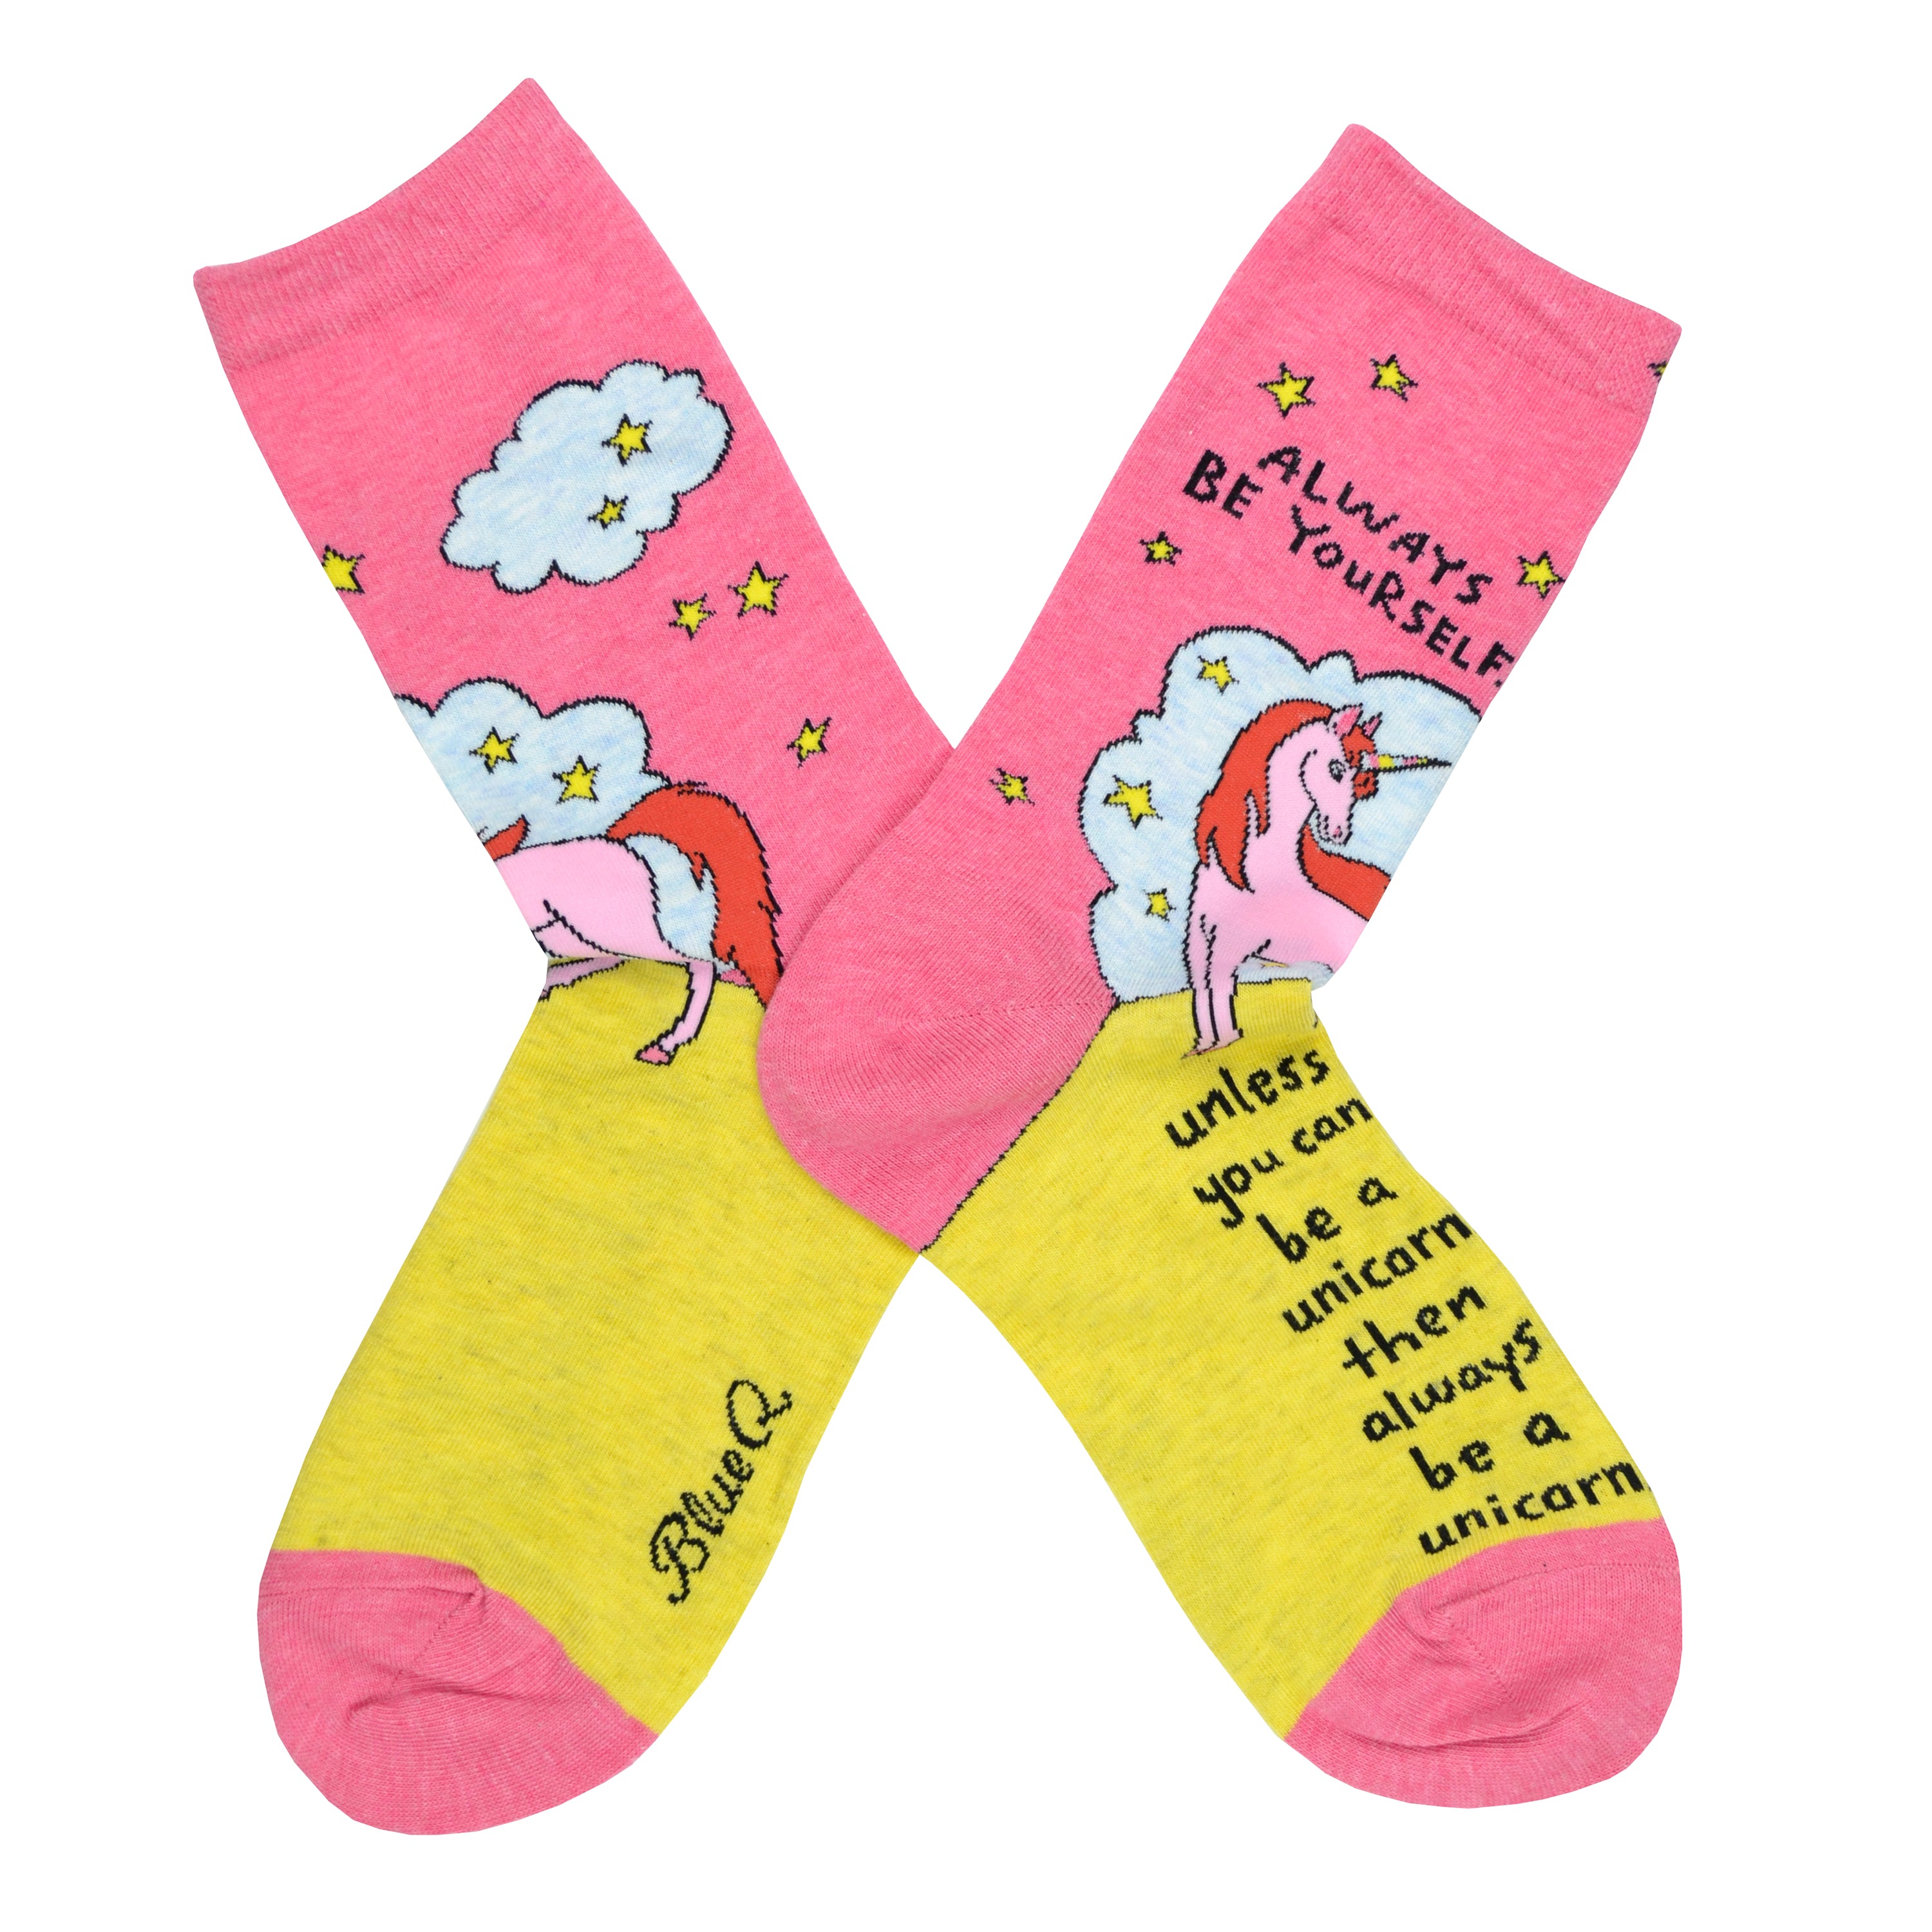 These pink cotton women's crew socks by the brand Blue Q feature a unicorn standing on a yellow hill in front of a blue cloud and yellow stars with the quote 